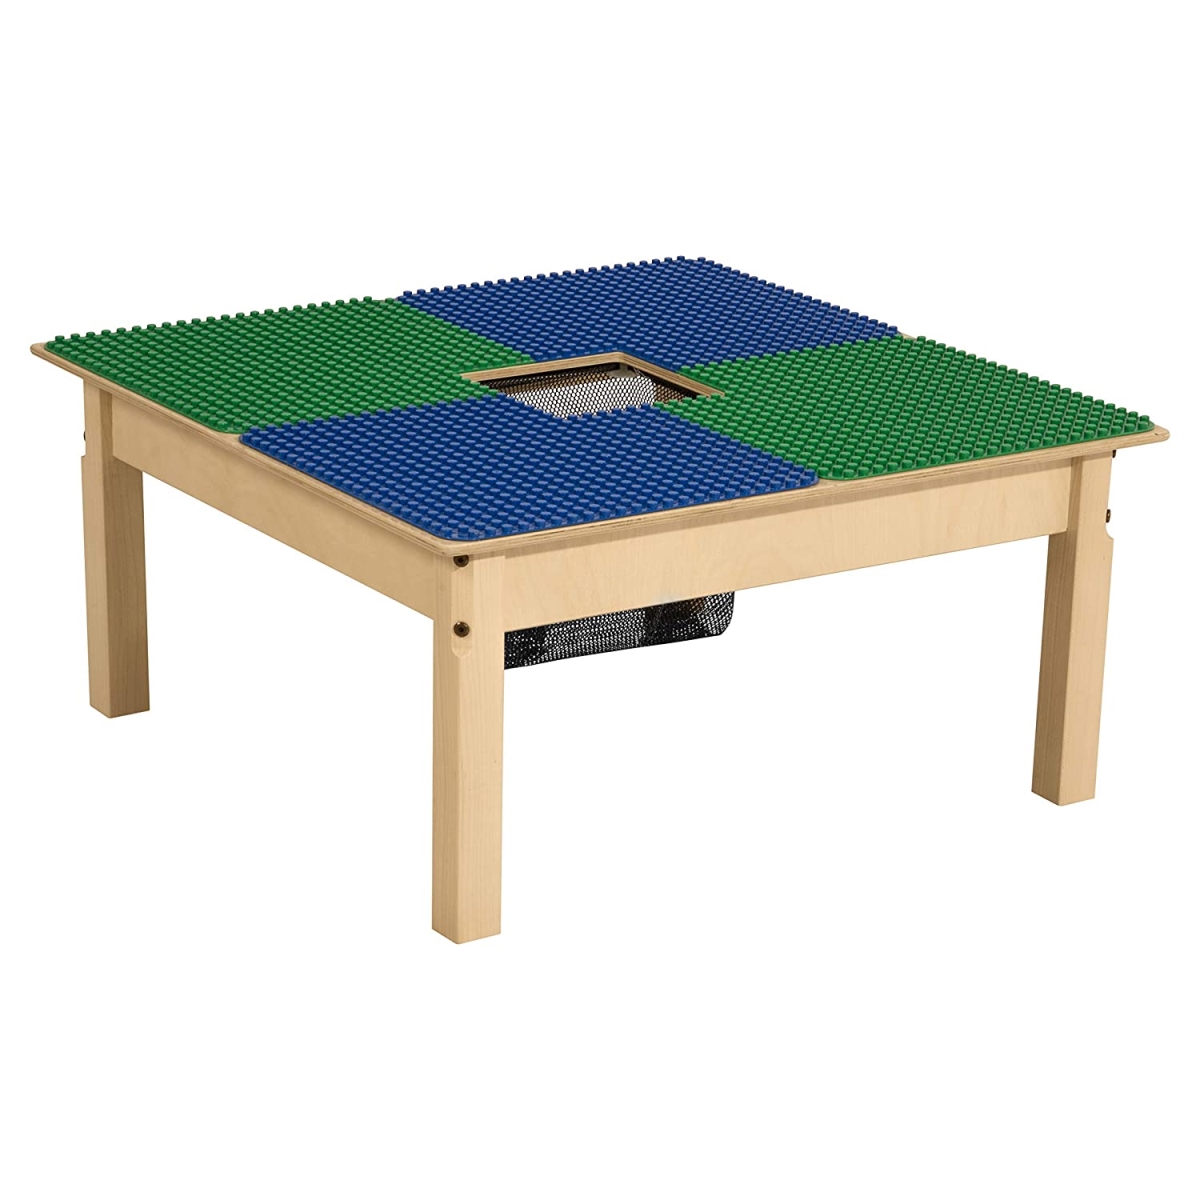 Tp3131pgn18-bg 18 In. Duplo Compatible Table With Legs, Blue & Green - Square